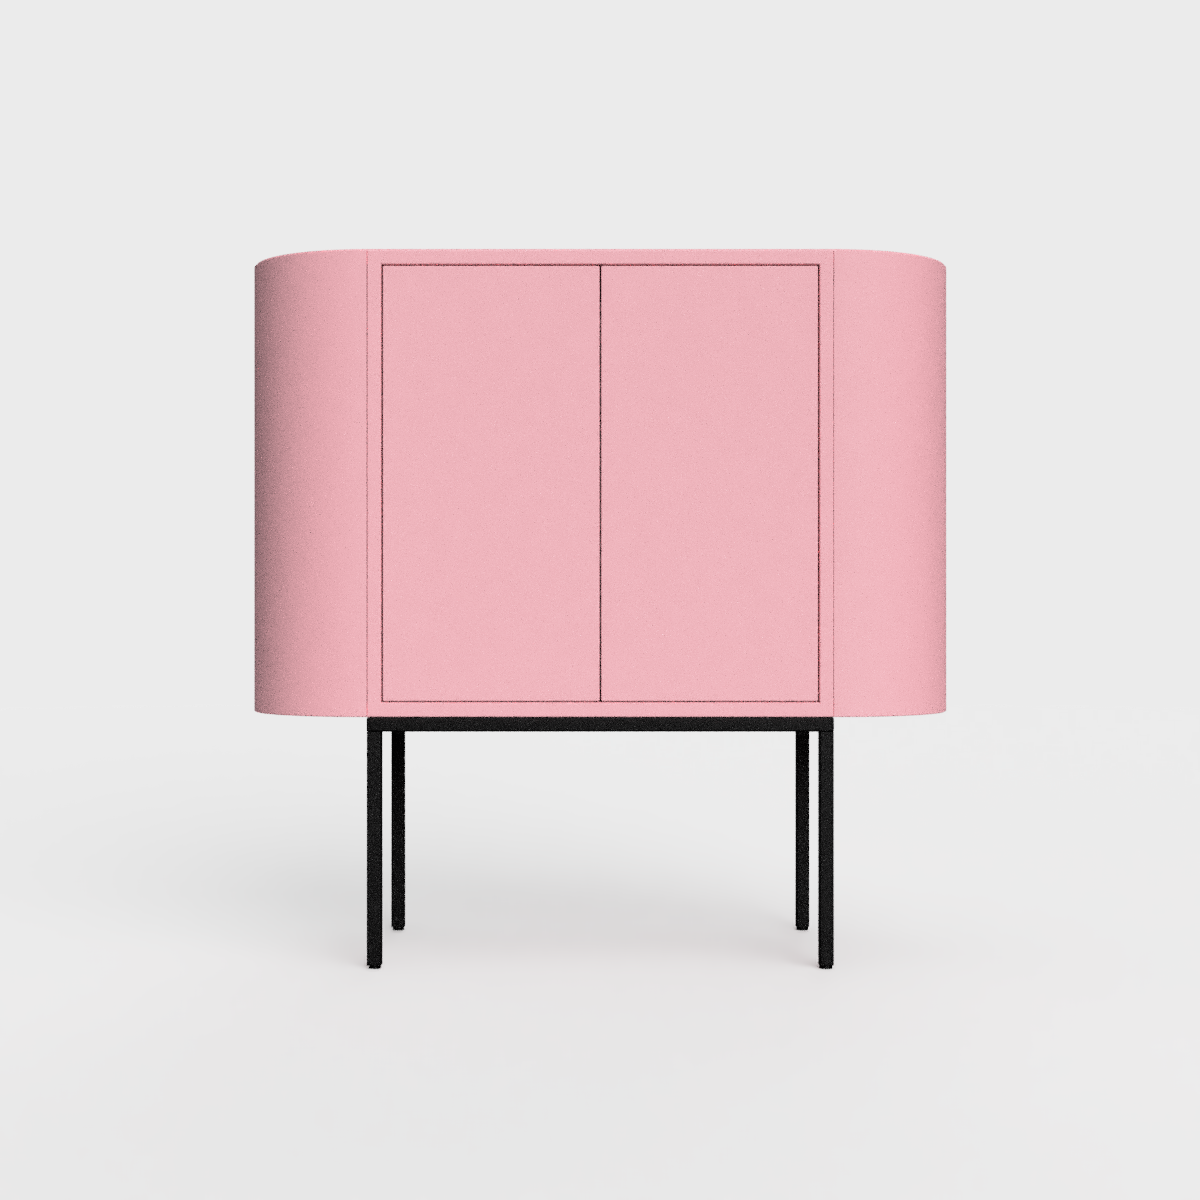 Siena 01 Sideboard in lily color, powder-coated steel, elegant and modern piece of furniture for your living room